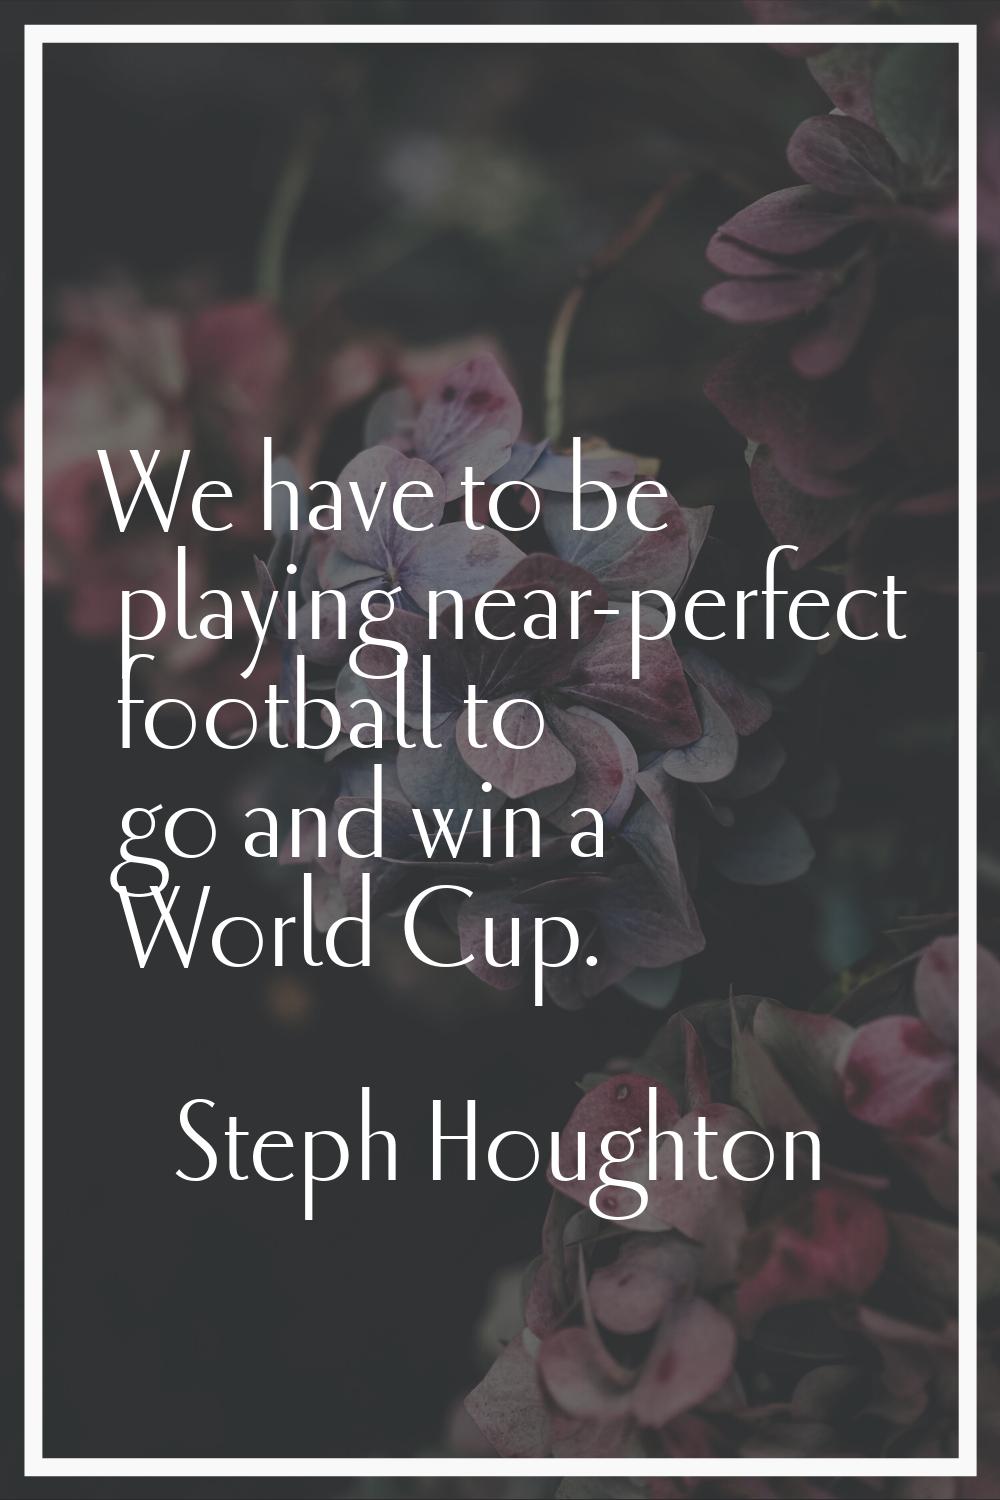 We have to be playing near-perfect football to go and win a World Cup.